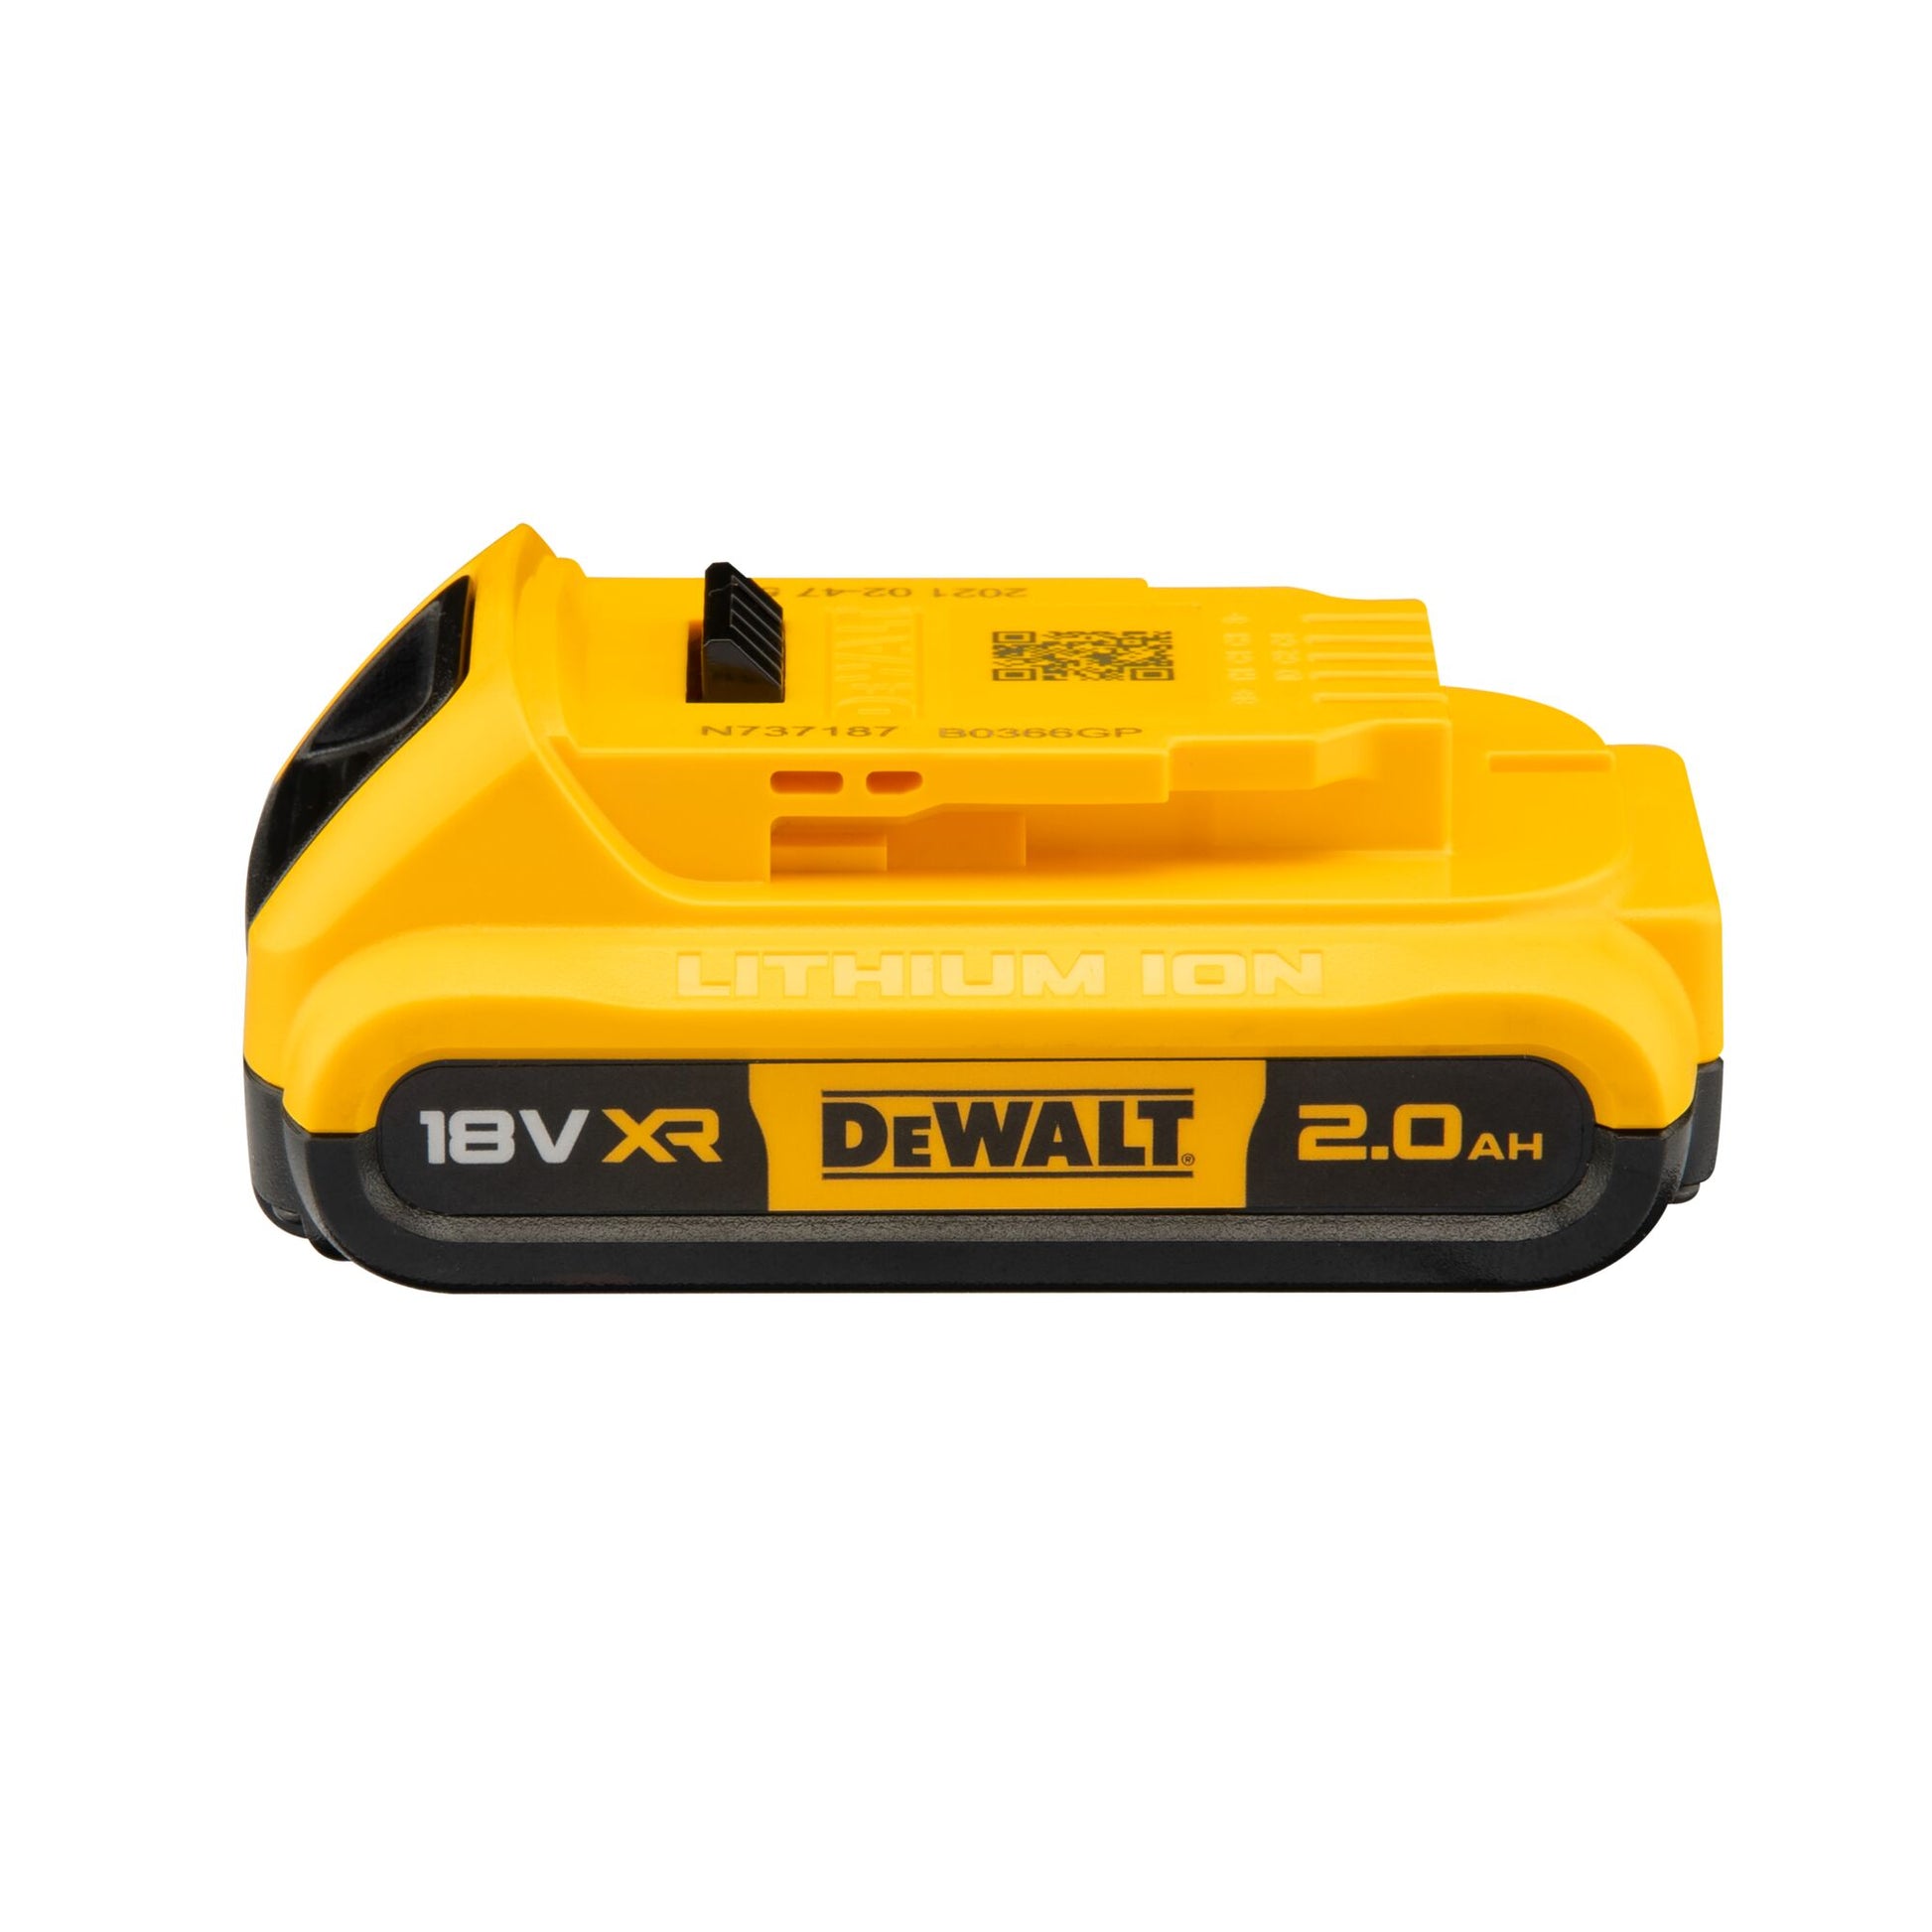 Dewalt 2ah battery for small dewalt power tools and projects